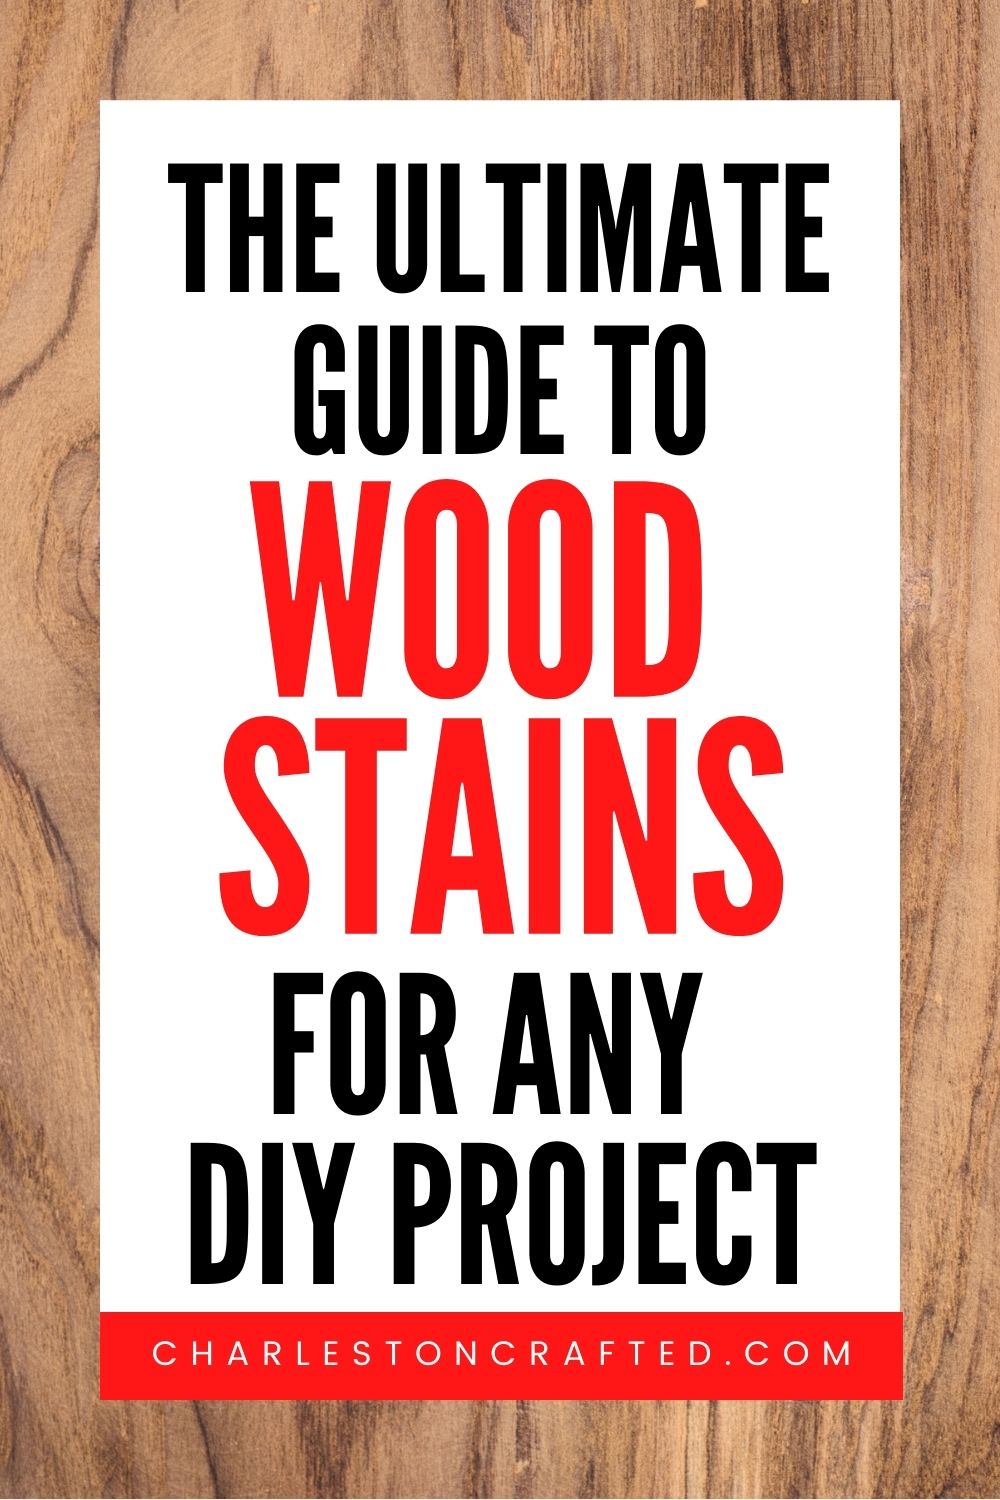 Less Mess Wood Stain makes projects easy, fun & clean